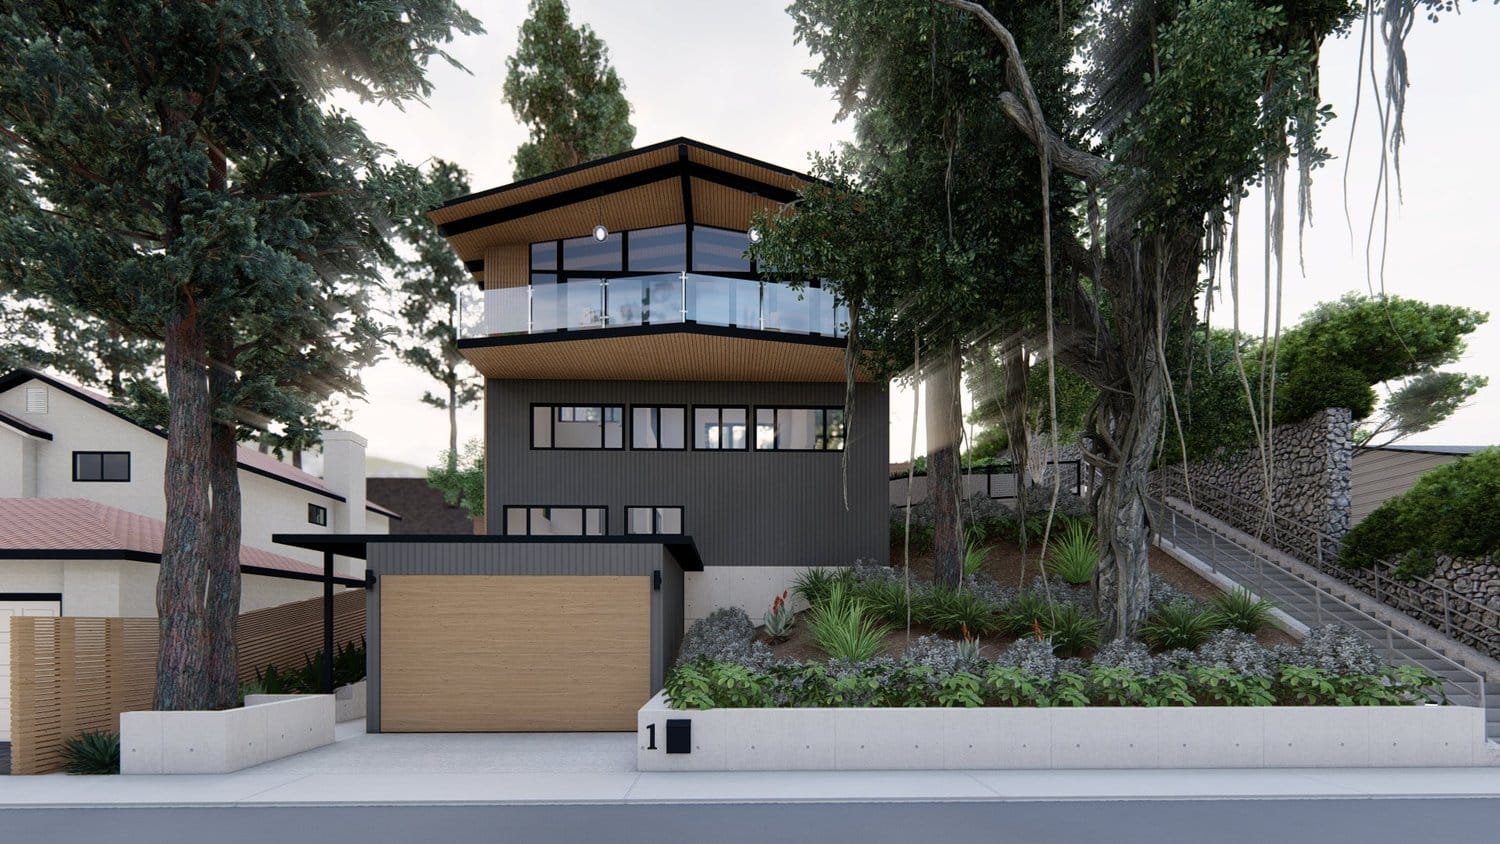 San Francisco frontyard design with garden, retaining wall and trees